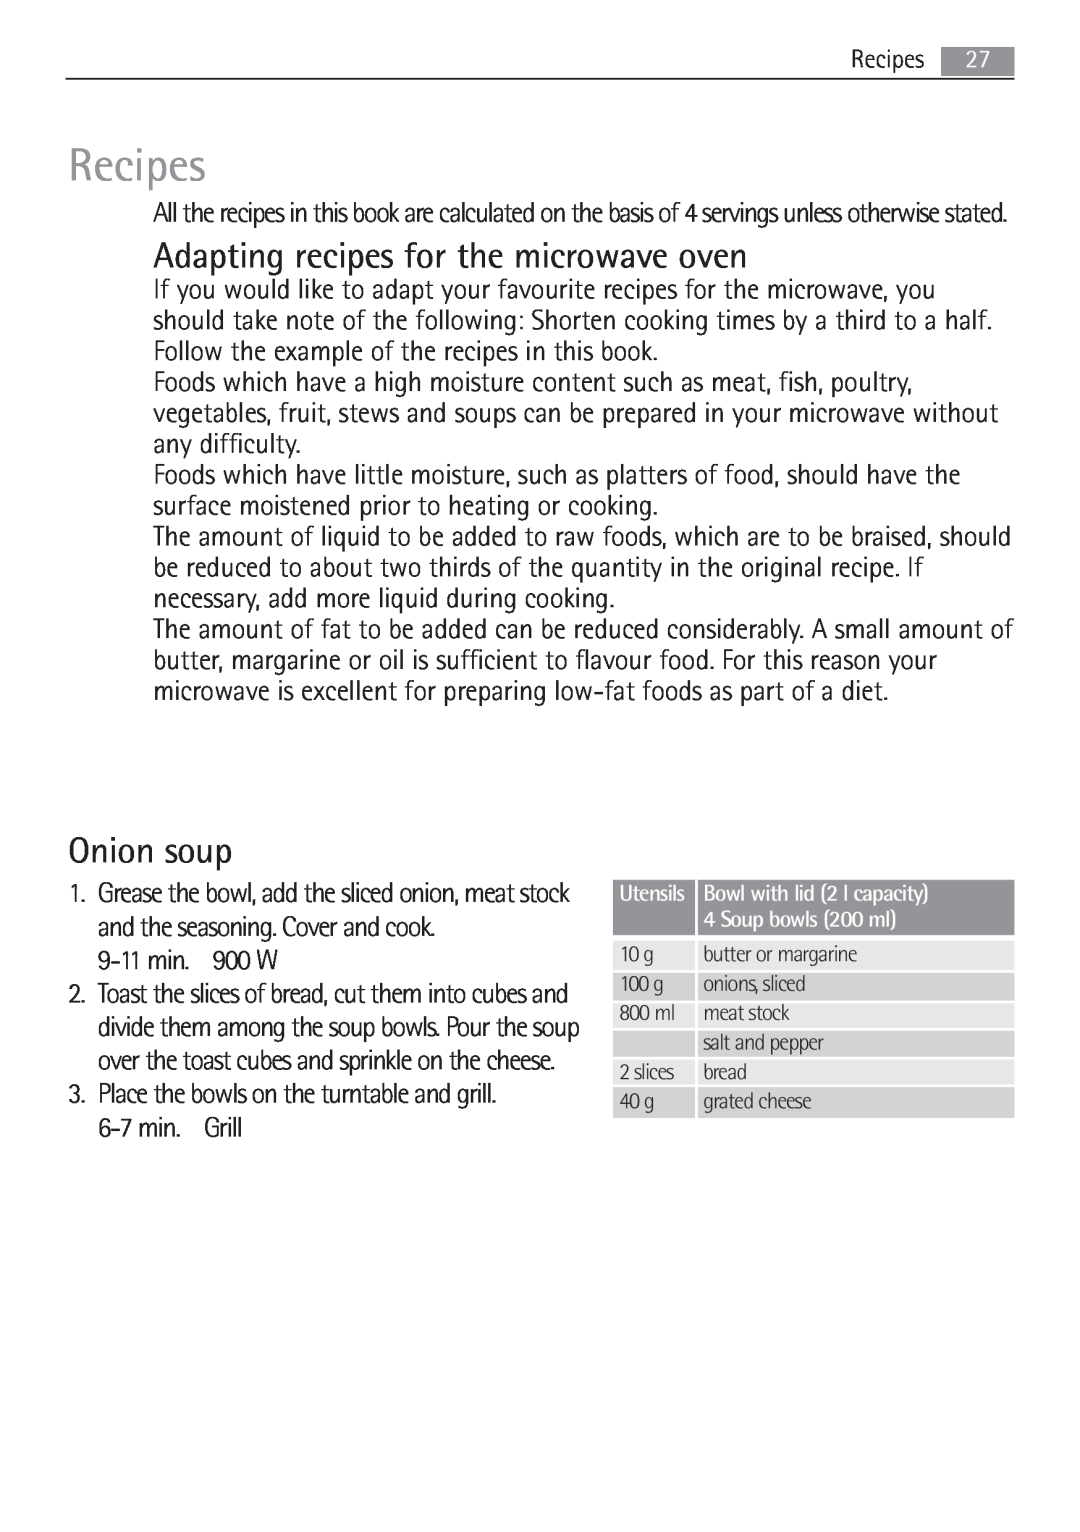 AEG MCD2662E user manual Recipes, Adapting recipes for the microwave oven, Onion soup 